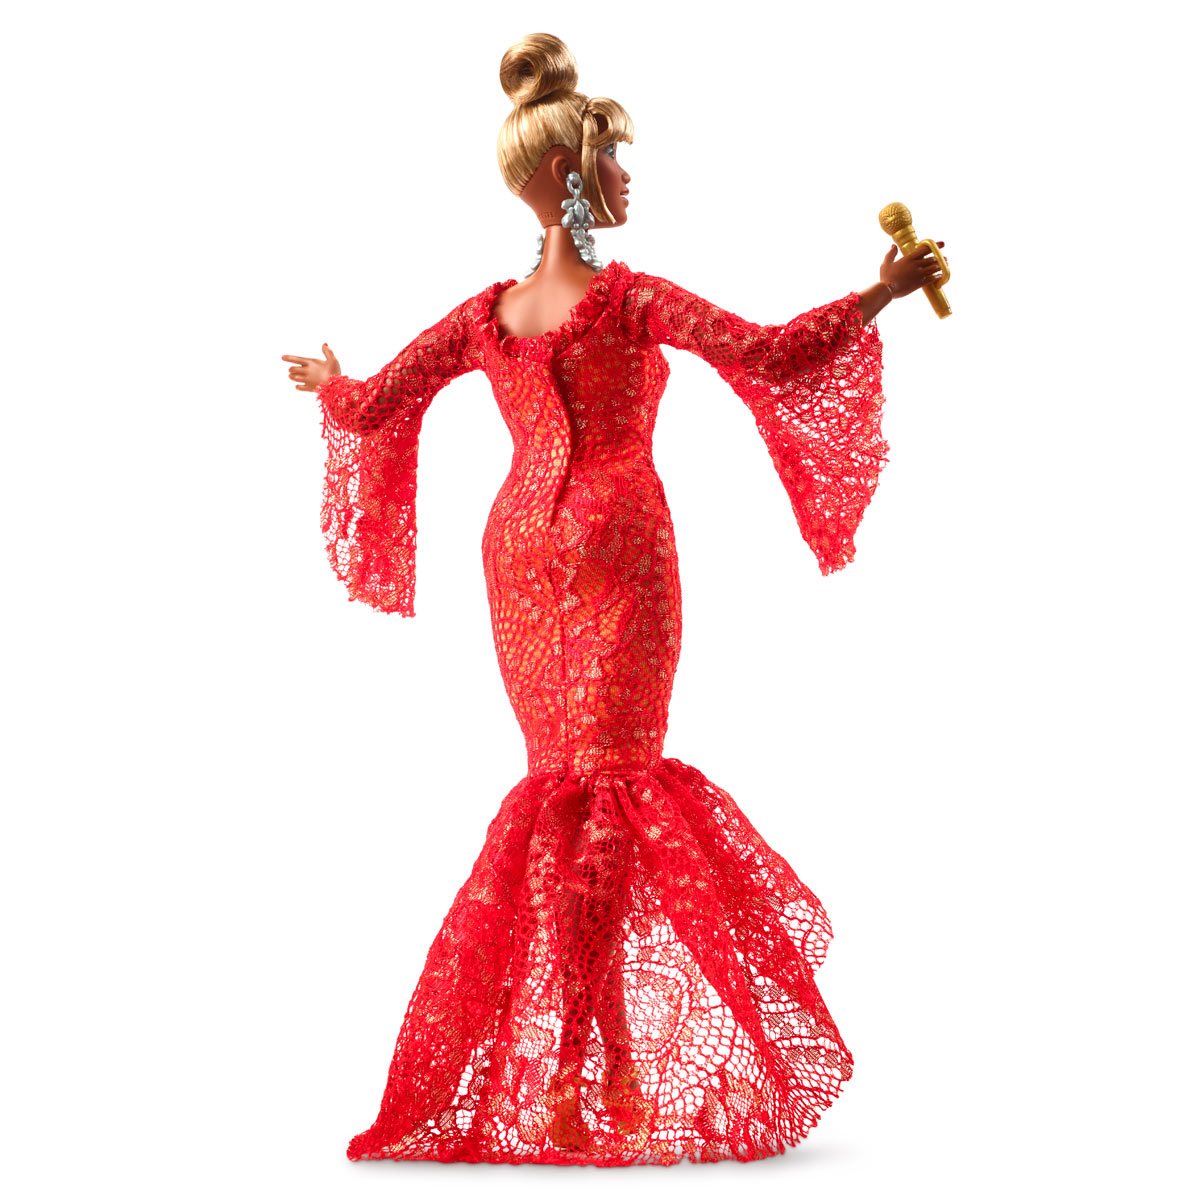 Red | Barbie gowns, Dress barbie doll, Doll clothes barbie